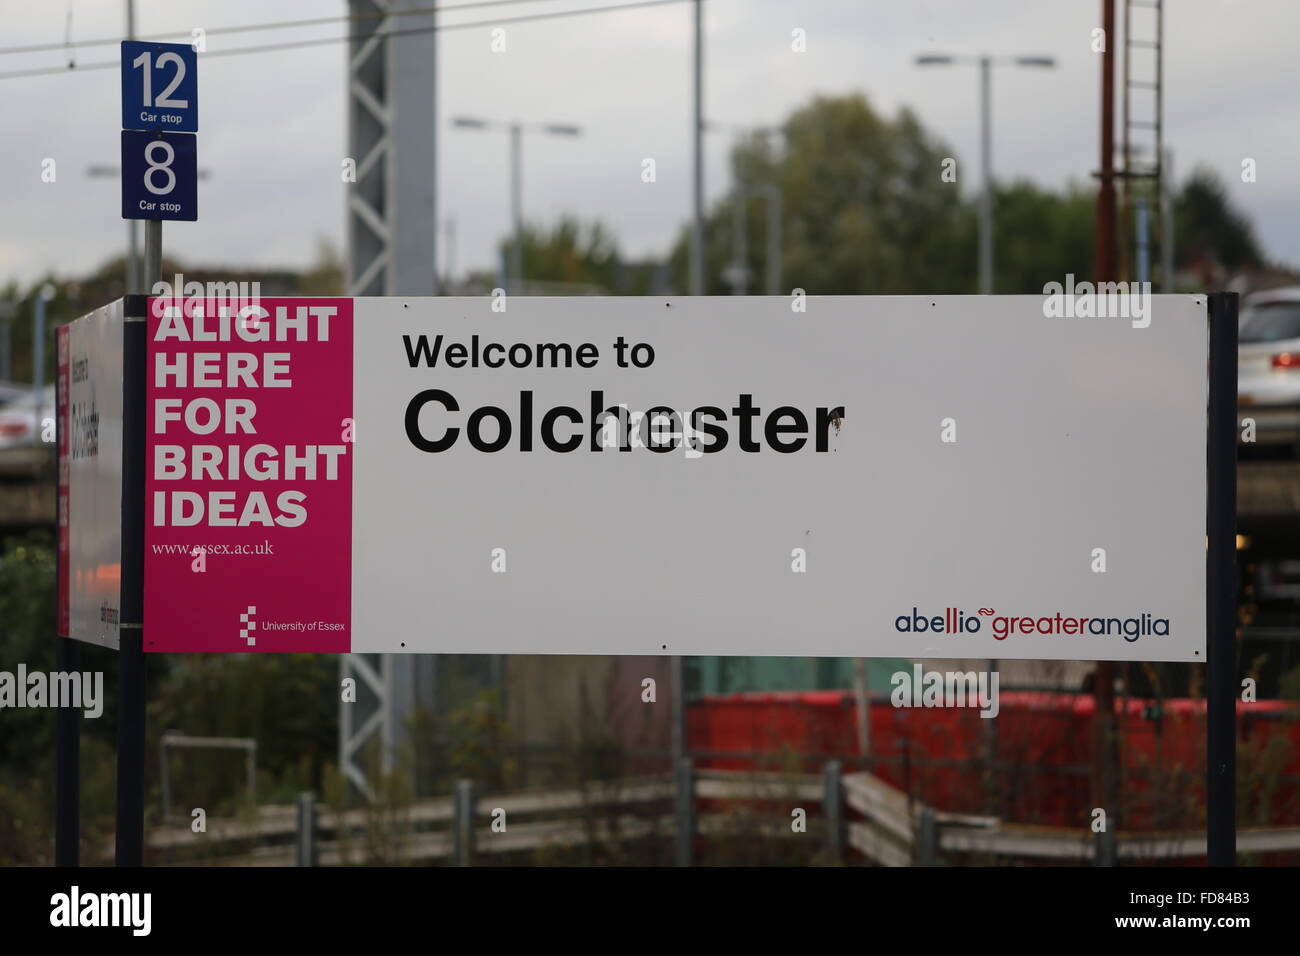 Welcome to Colchester Railway Station Sign Abellio Greater Anglia AGA  Alight here for bright ideas slogan Stock Photo